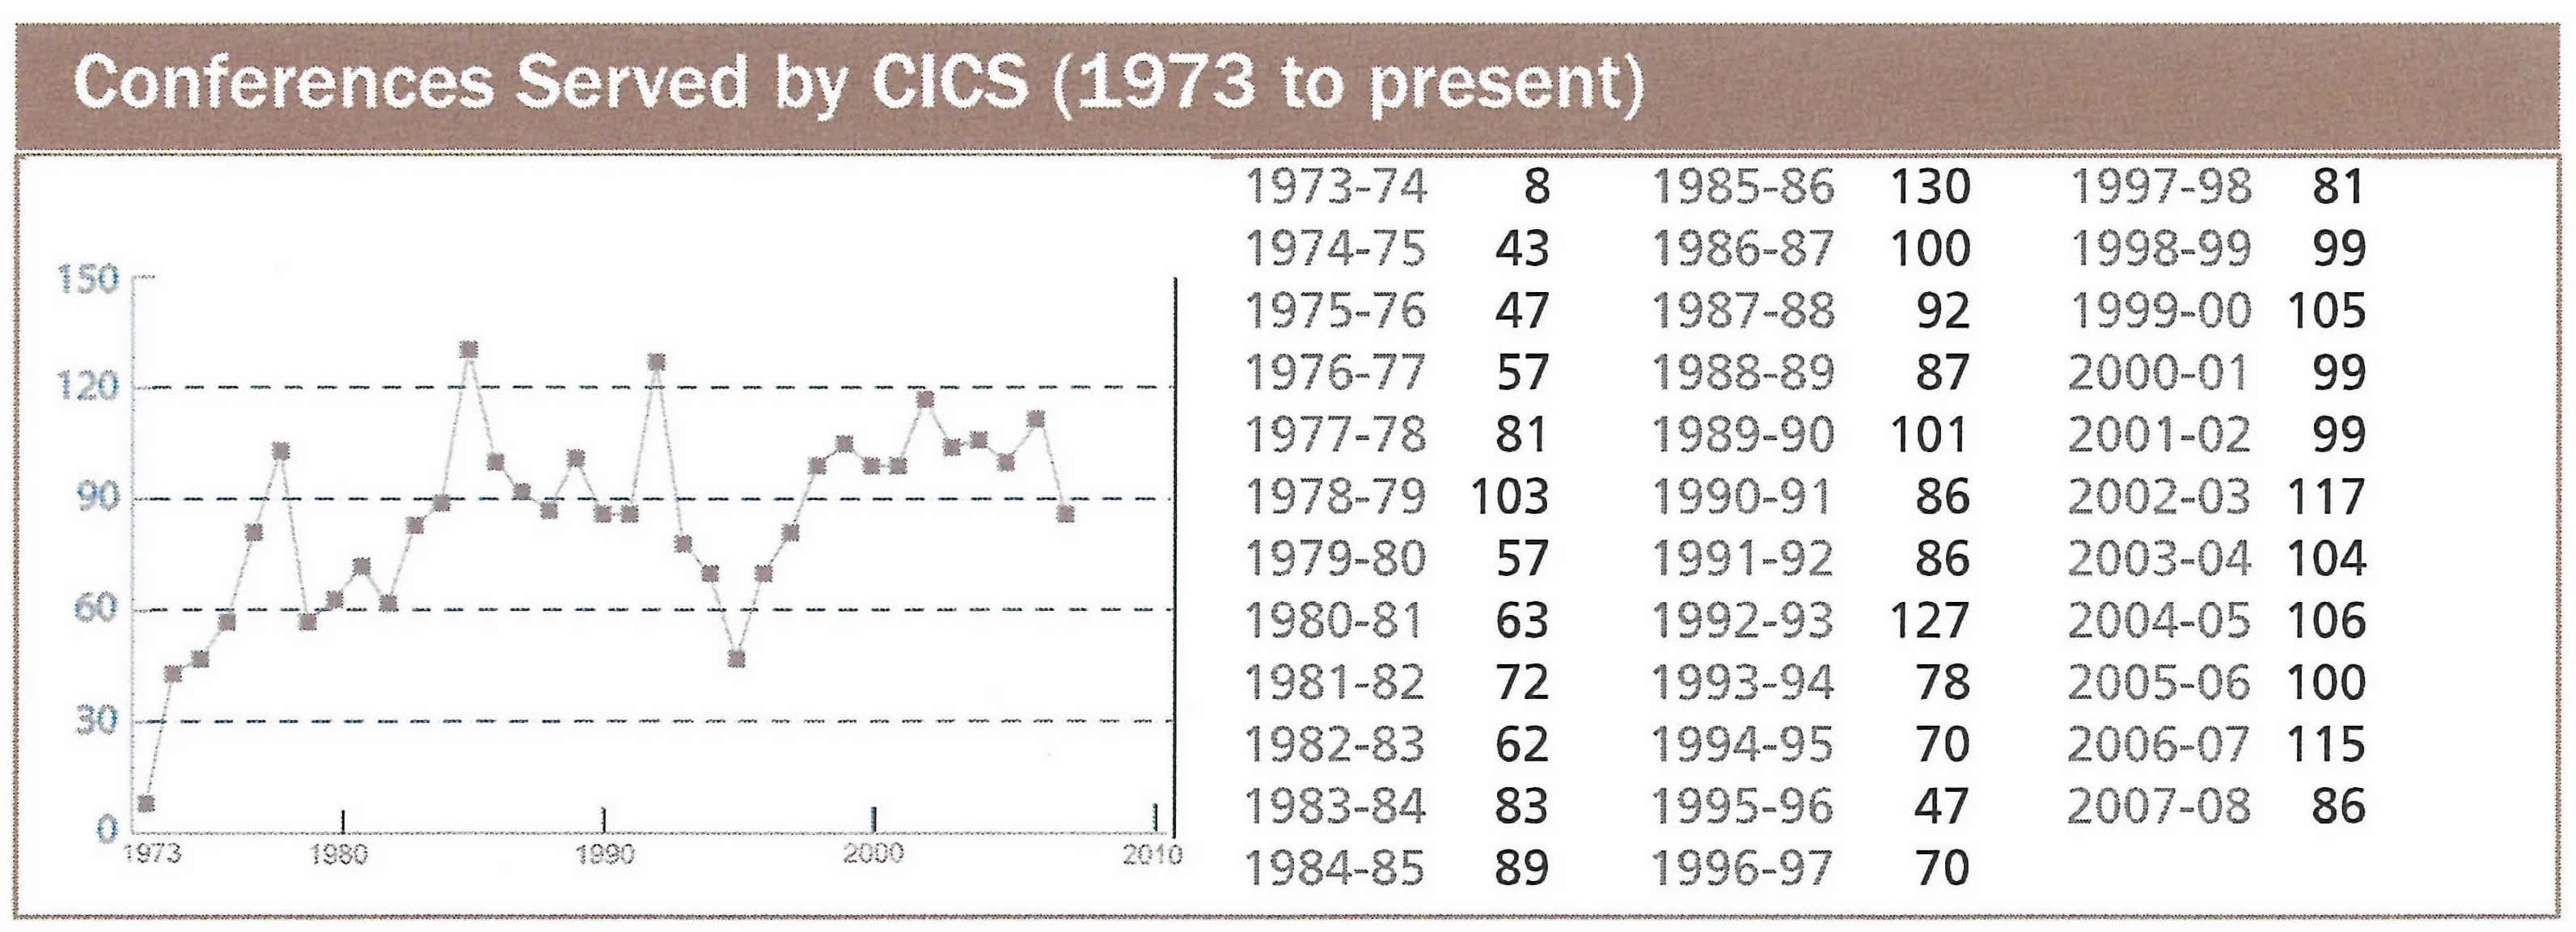 Number of conferences served annually by CICS from 1973-74 to 2007-08.